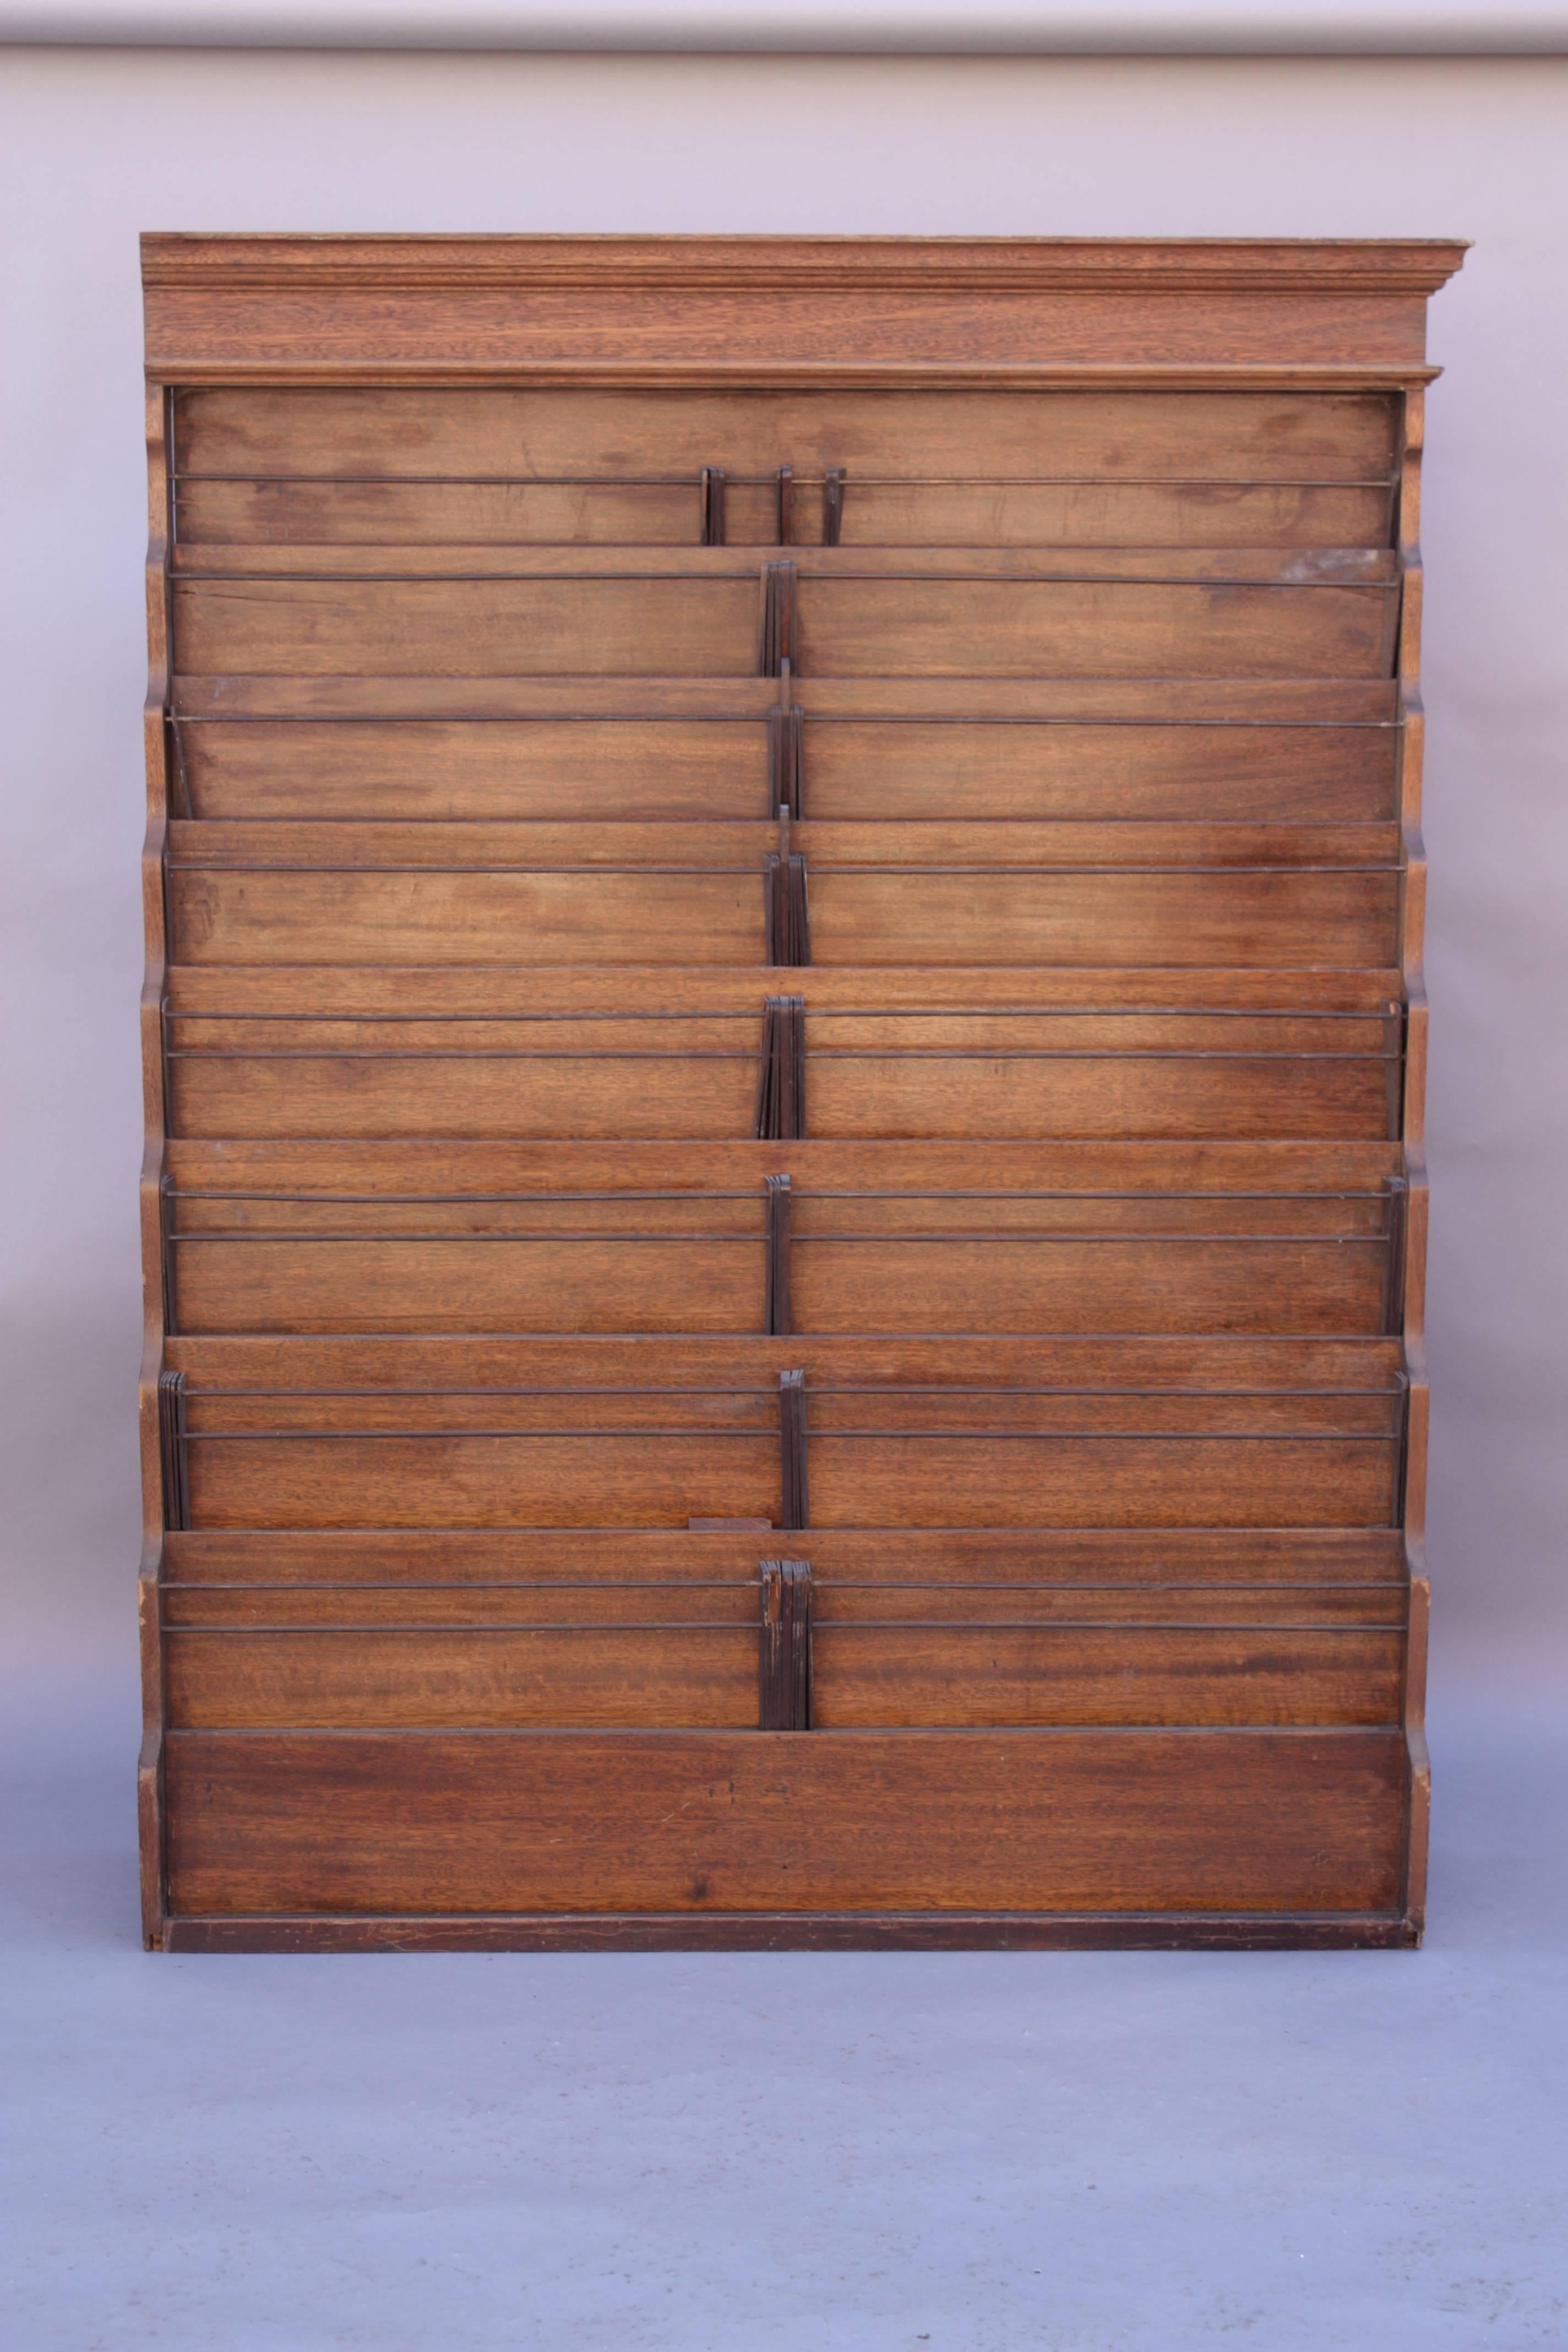 Early 1900s news stand magazine rack with original wooden dividers. 